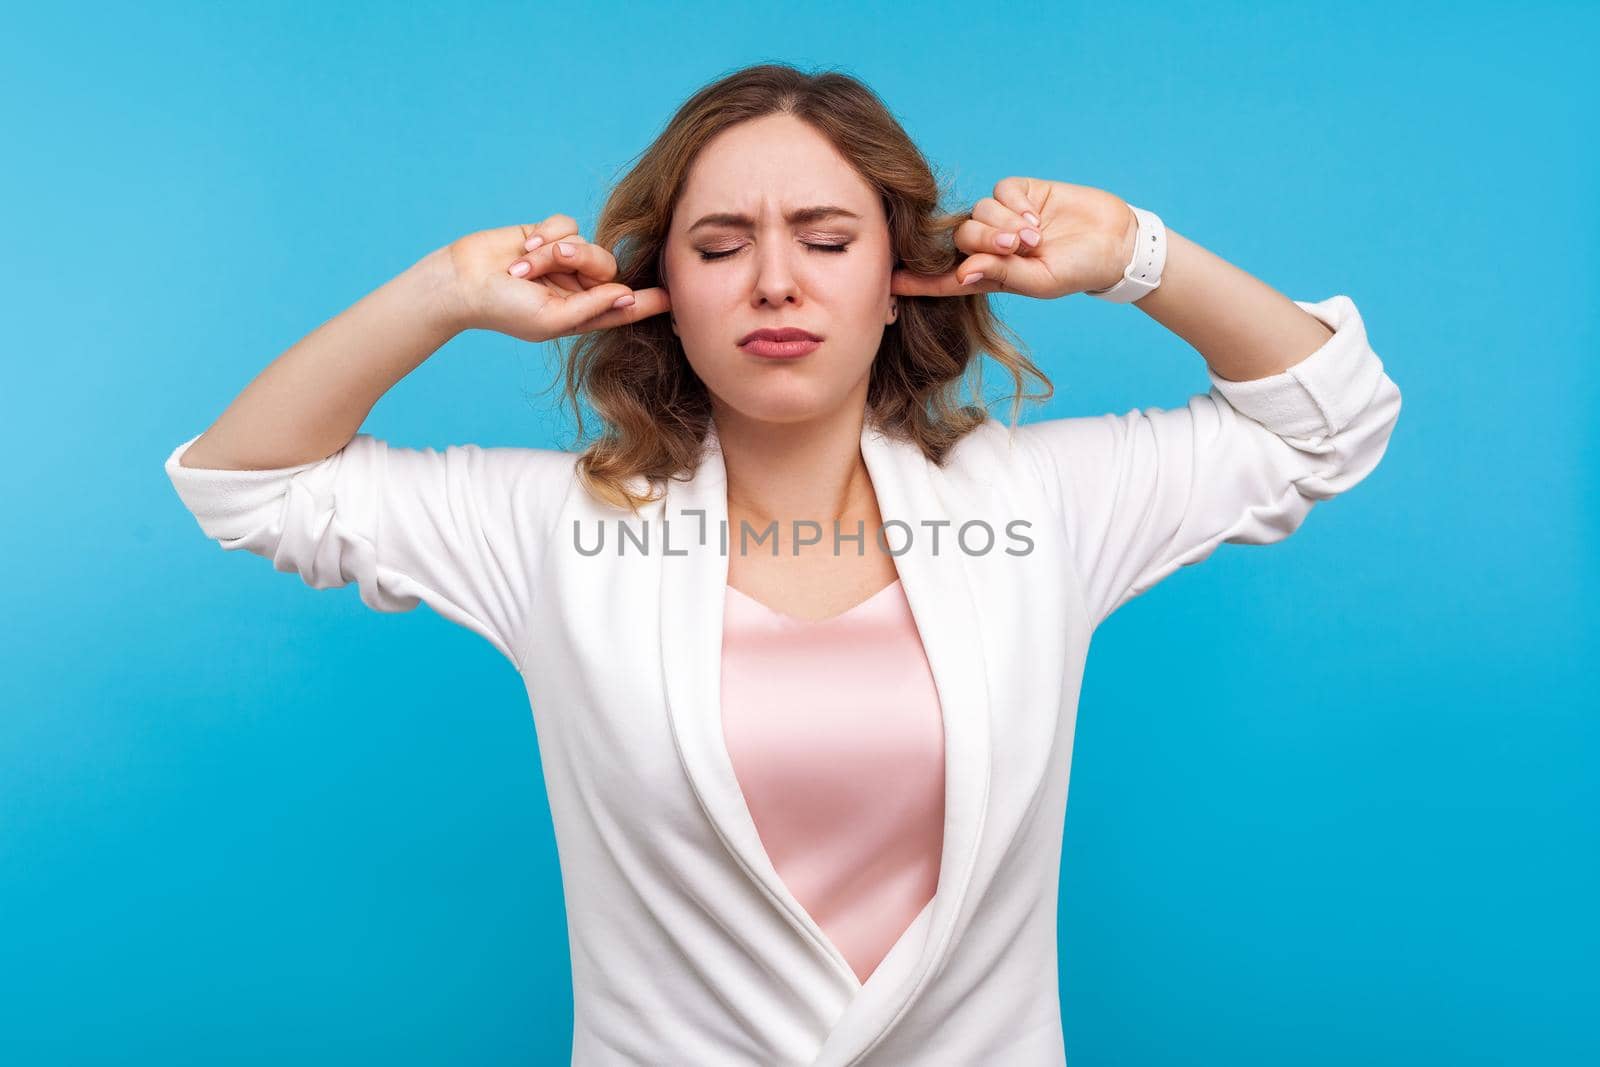 Don't want to listen, Portrait of resentful girl with wavy hair in white jacket standing covering ears and closed eyes in displeasure, frustrated about what she hear, ignoring loud noise. studio shot